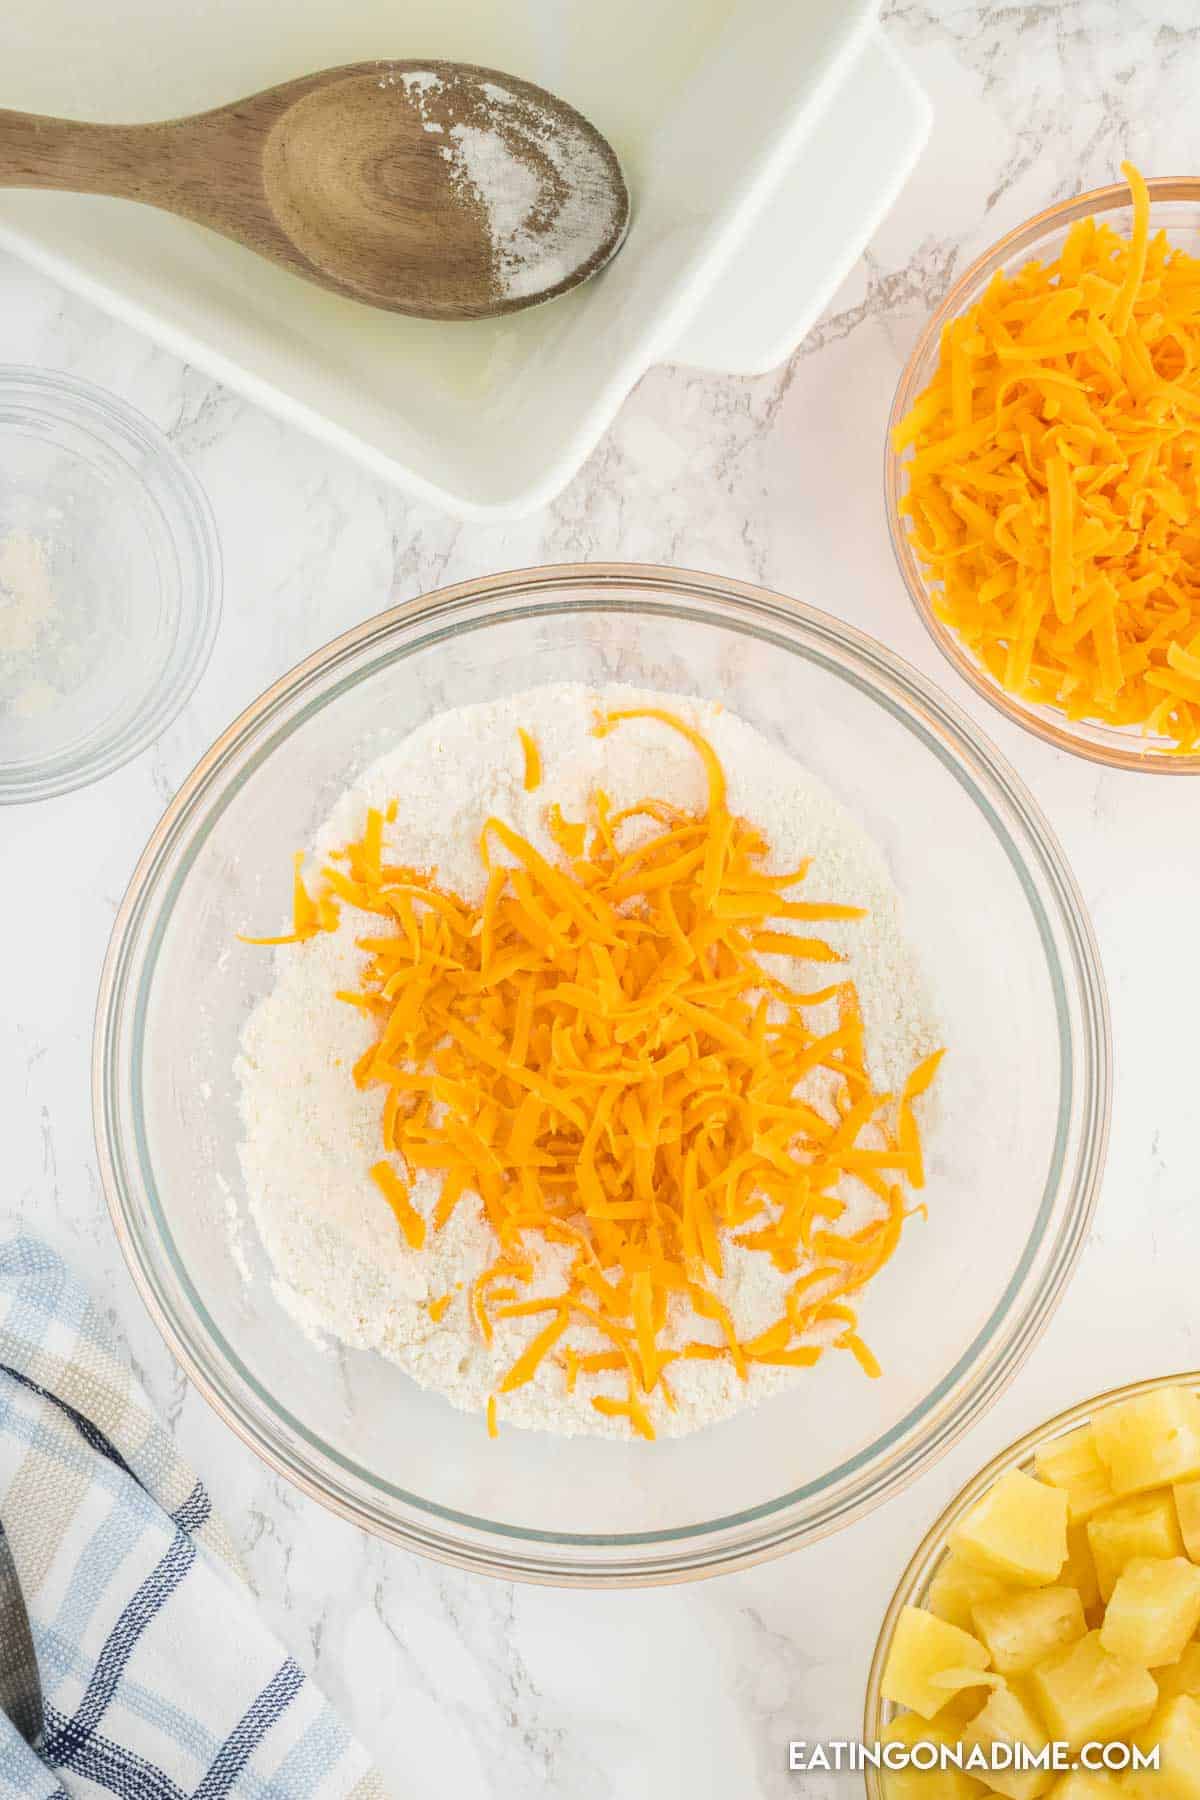 Combining flour and sugar with the shredded cheese in a bowl